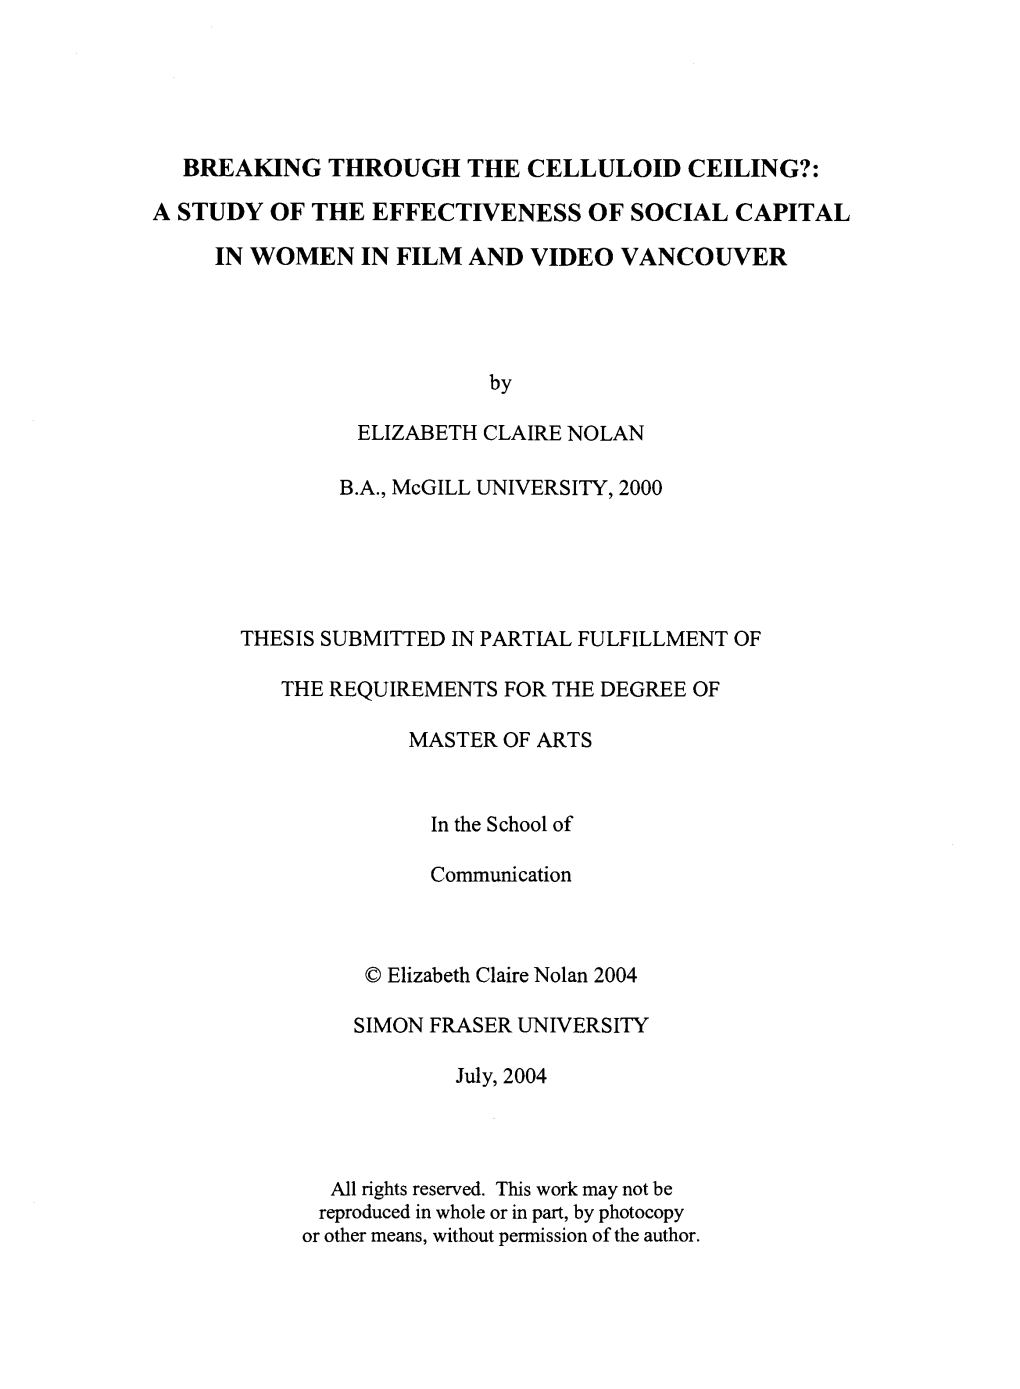 A Study of the Effectiveness of Social Capital in Women in Film and Video Vancouver